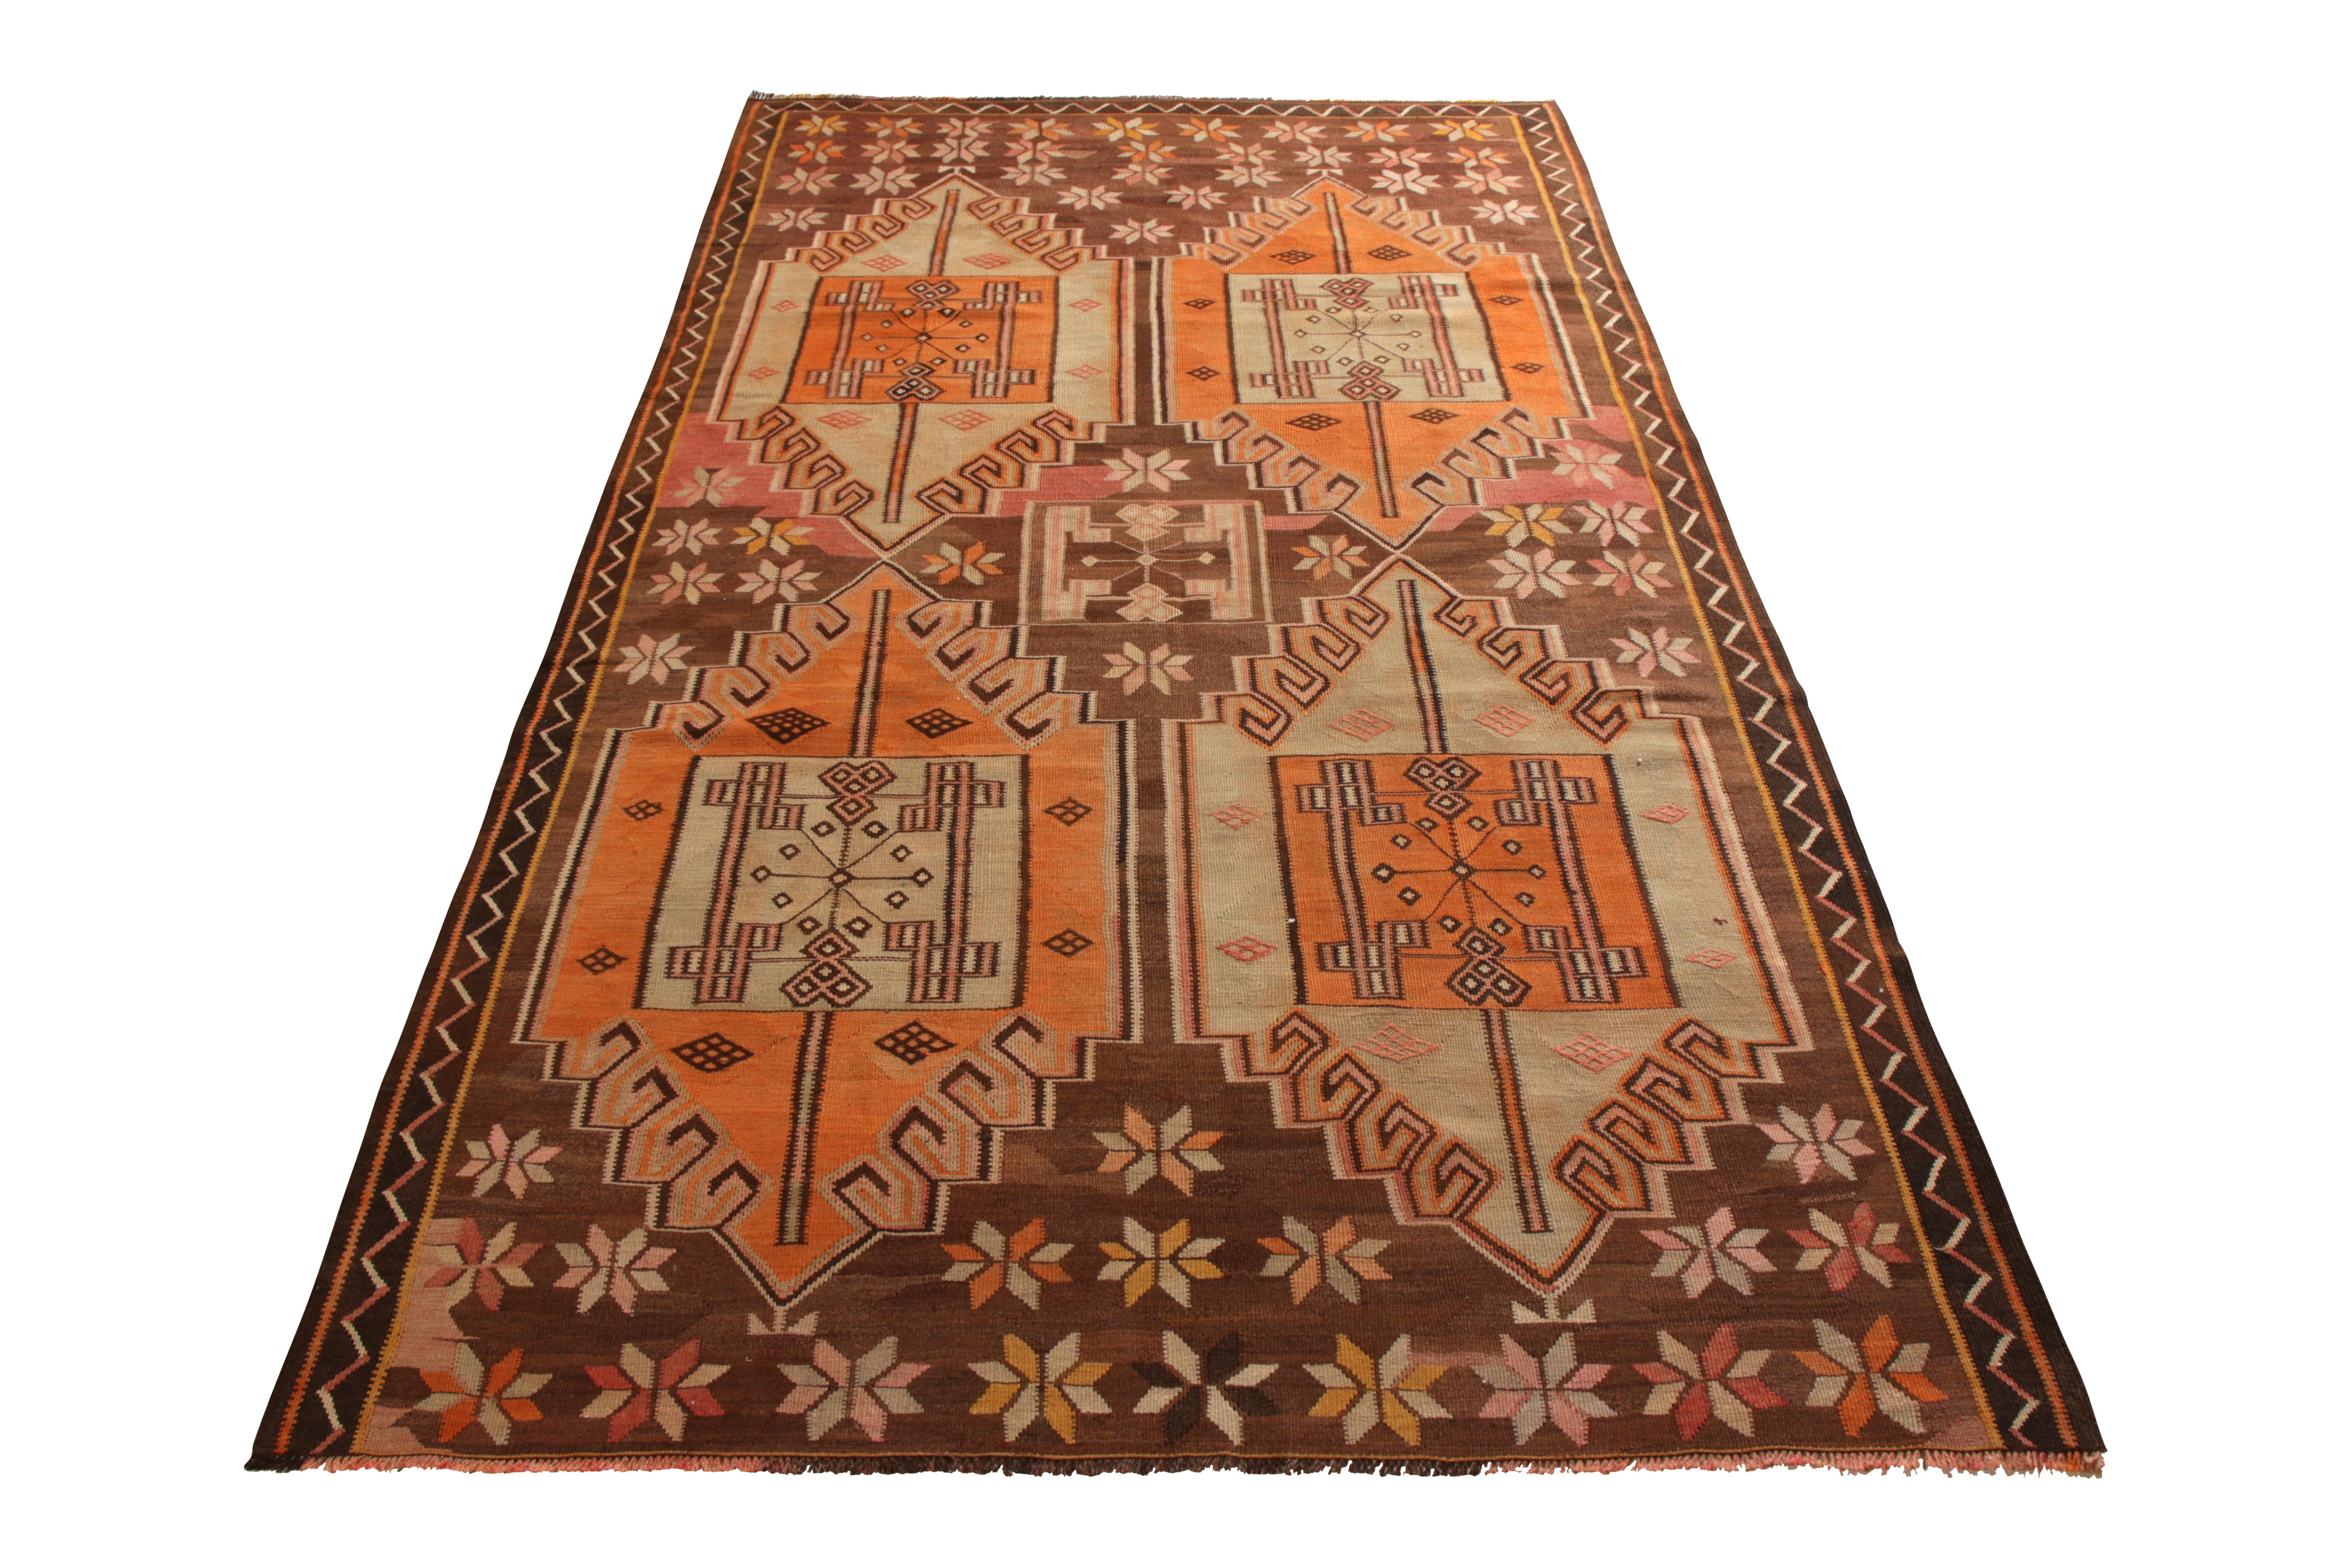 A 5x9 vintage Kilim rug of Kars design lineage, handwoven in wool originating from Turkey circa 1950-1960. Enjoying a graphic medallion pattern in a unique play of brown with orange and blue among the playful accenting colors. Further sporting good